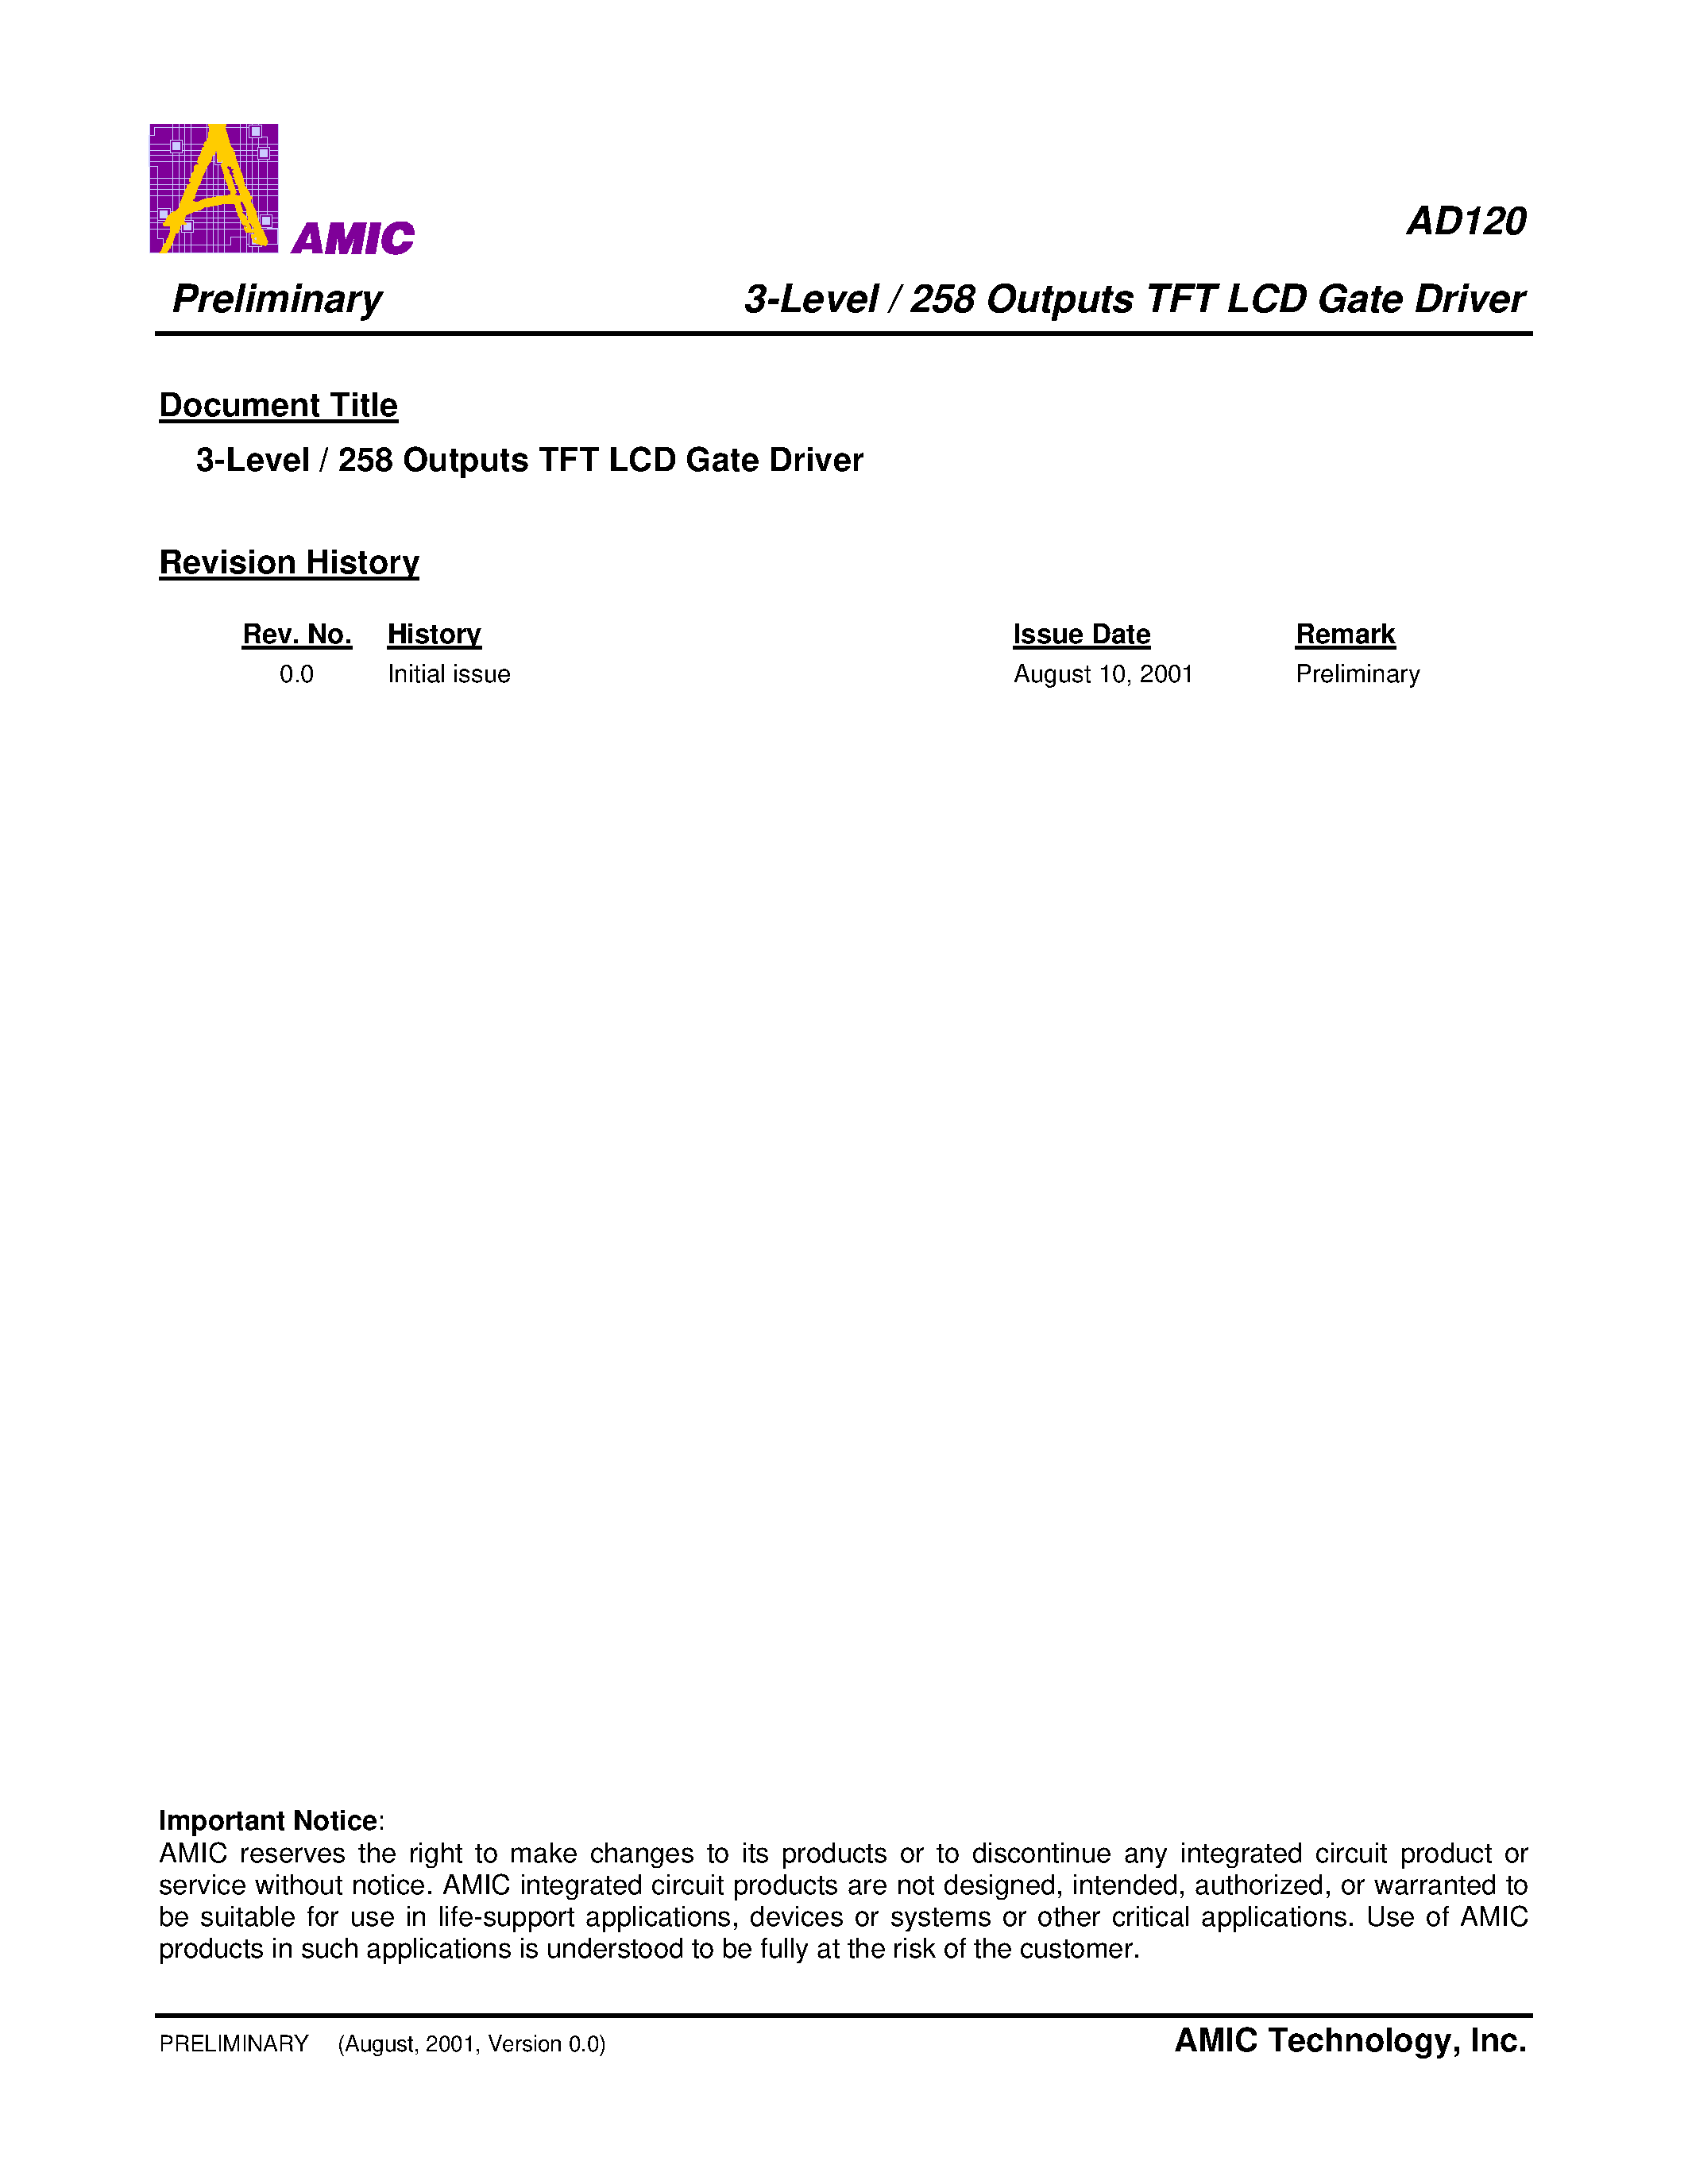 Datasheet AD120 - 3-Level / 258 Outputs TFT LCD Gate Driver page 1